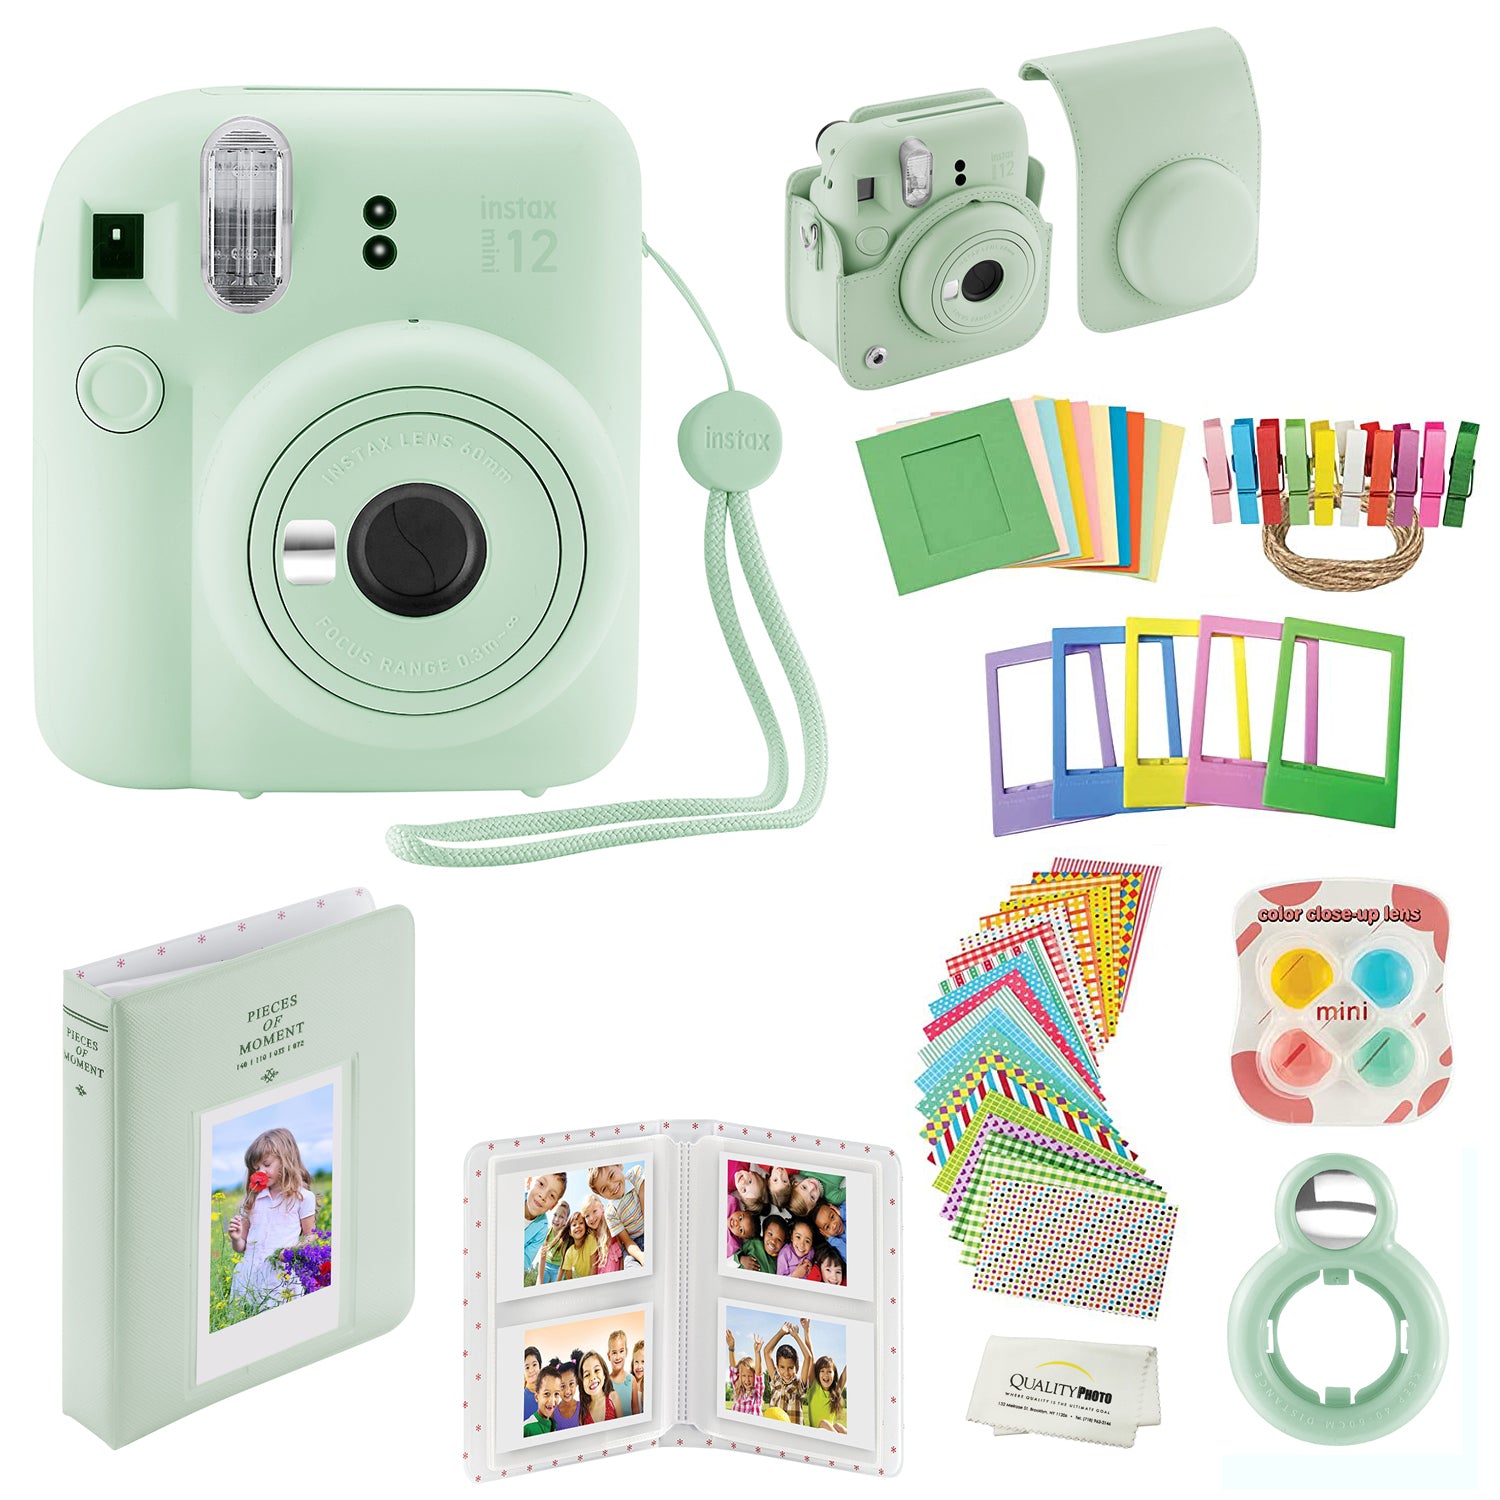 Fujifilm Instax Mini 12 Instant Camera with Case, Decoration Stickers, Frames, Photo Album and More Accessory kit (Mint Green)